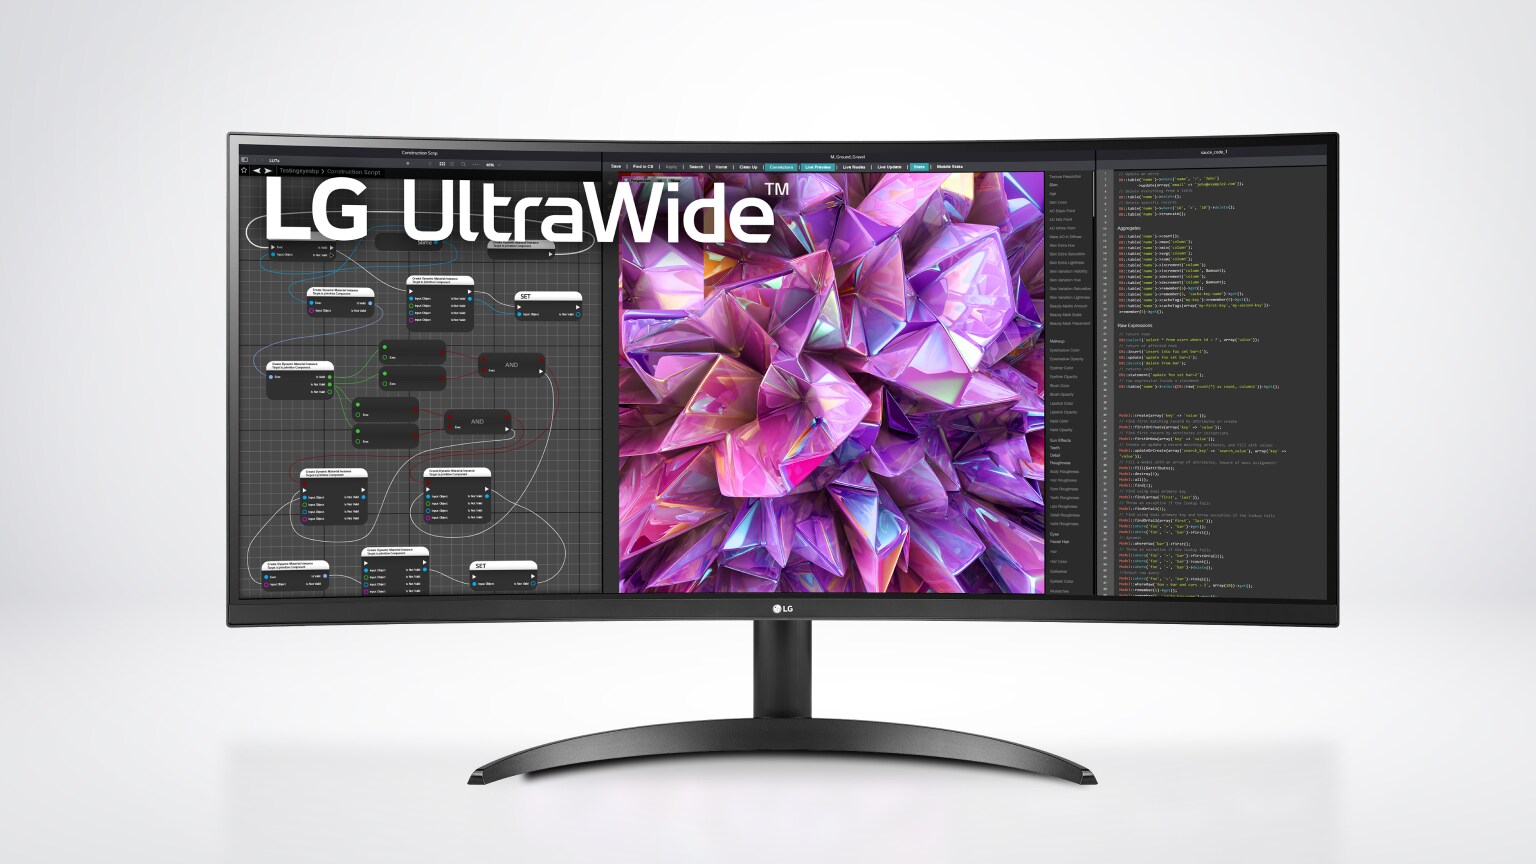 Save up to 25% off select Monitors